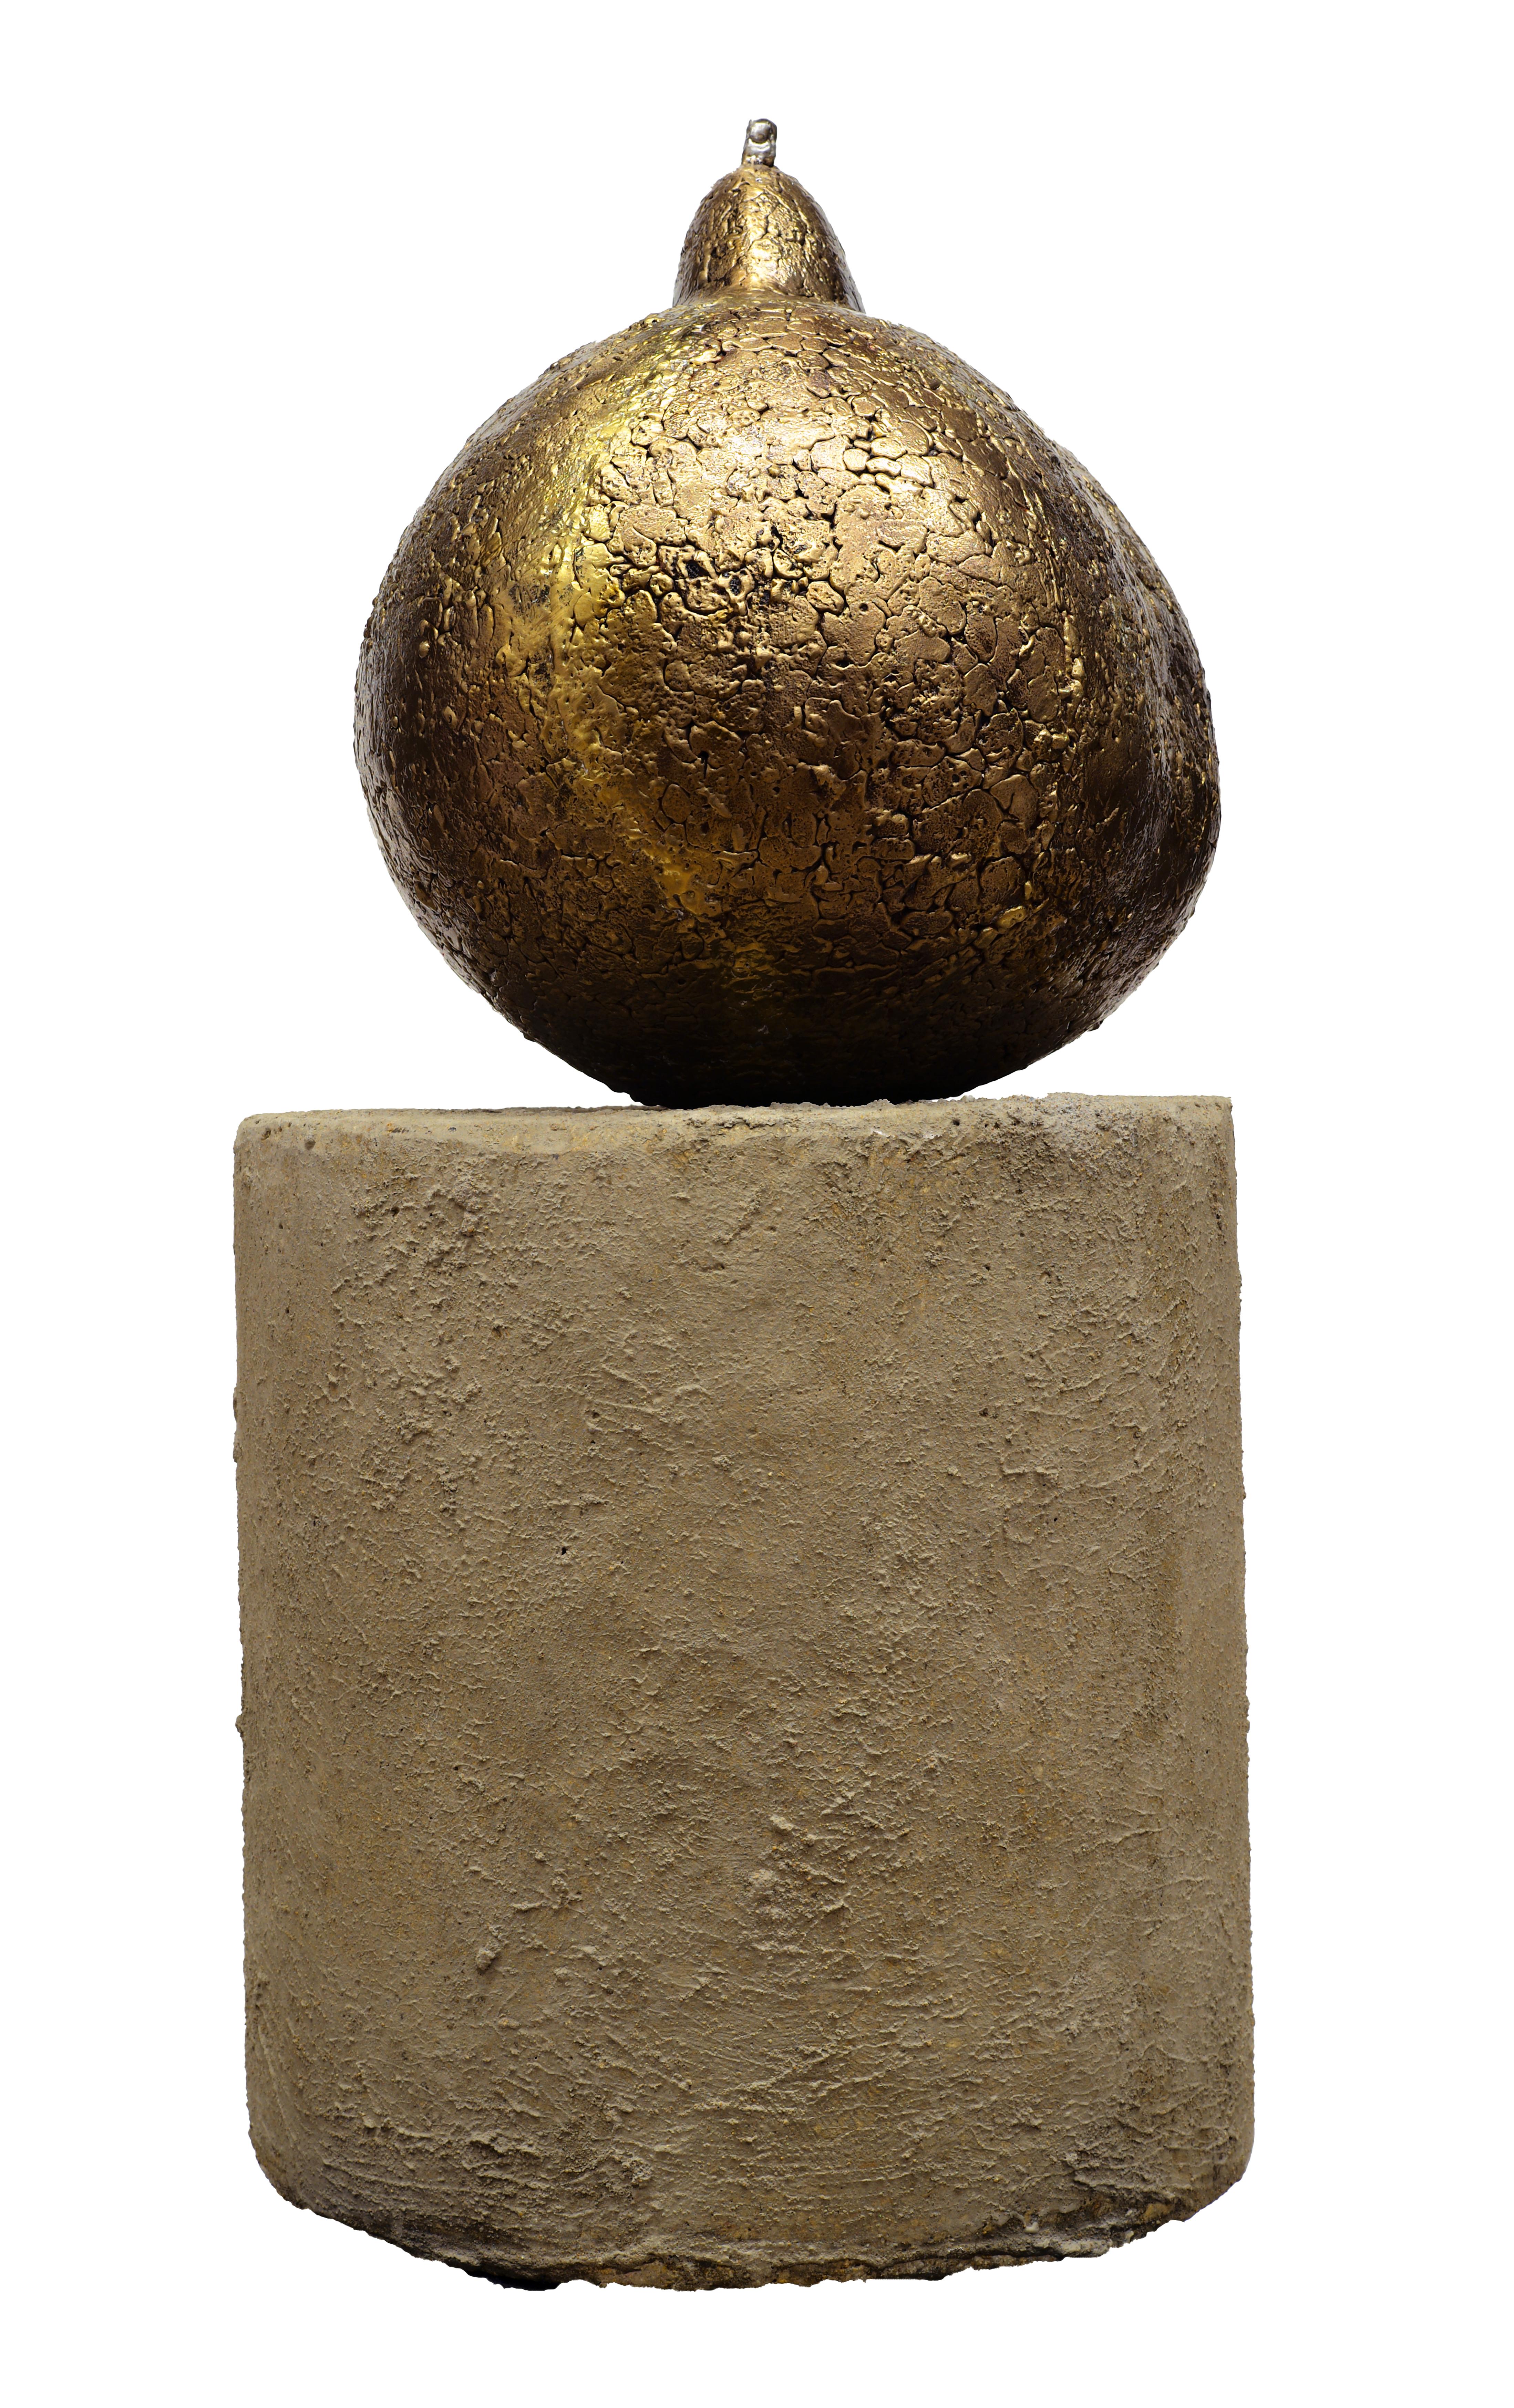 North American Summer Pear, Bronze Sculpture with Textured Golden Surface on Concrete Base For Sale